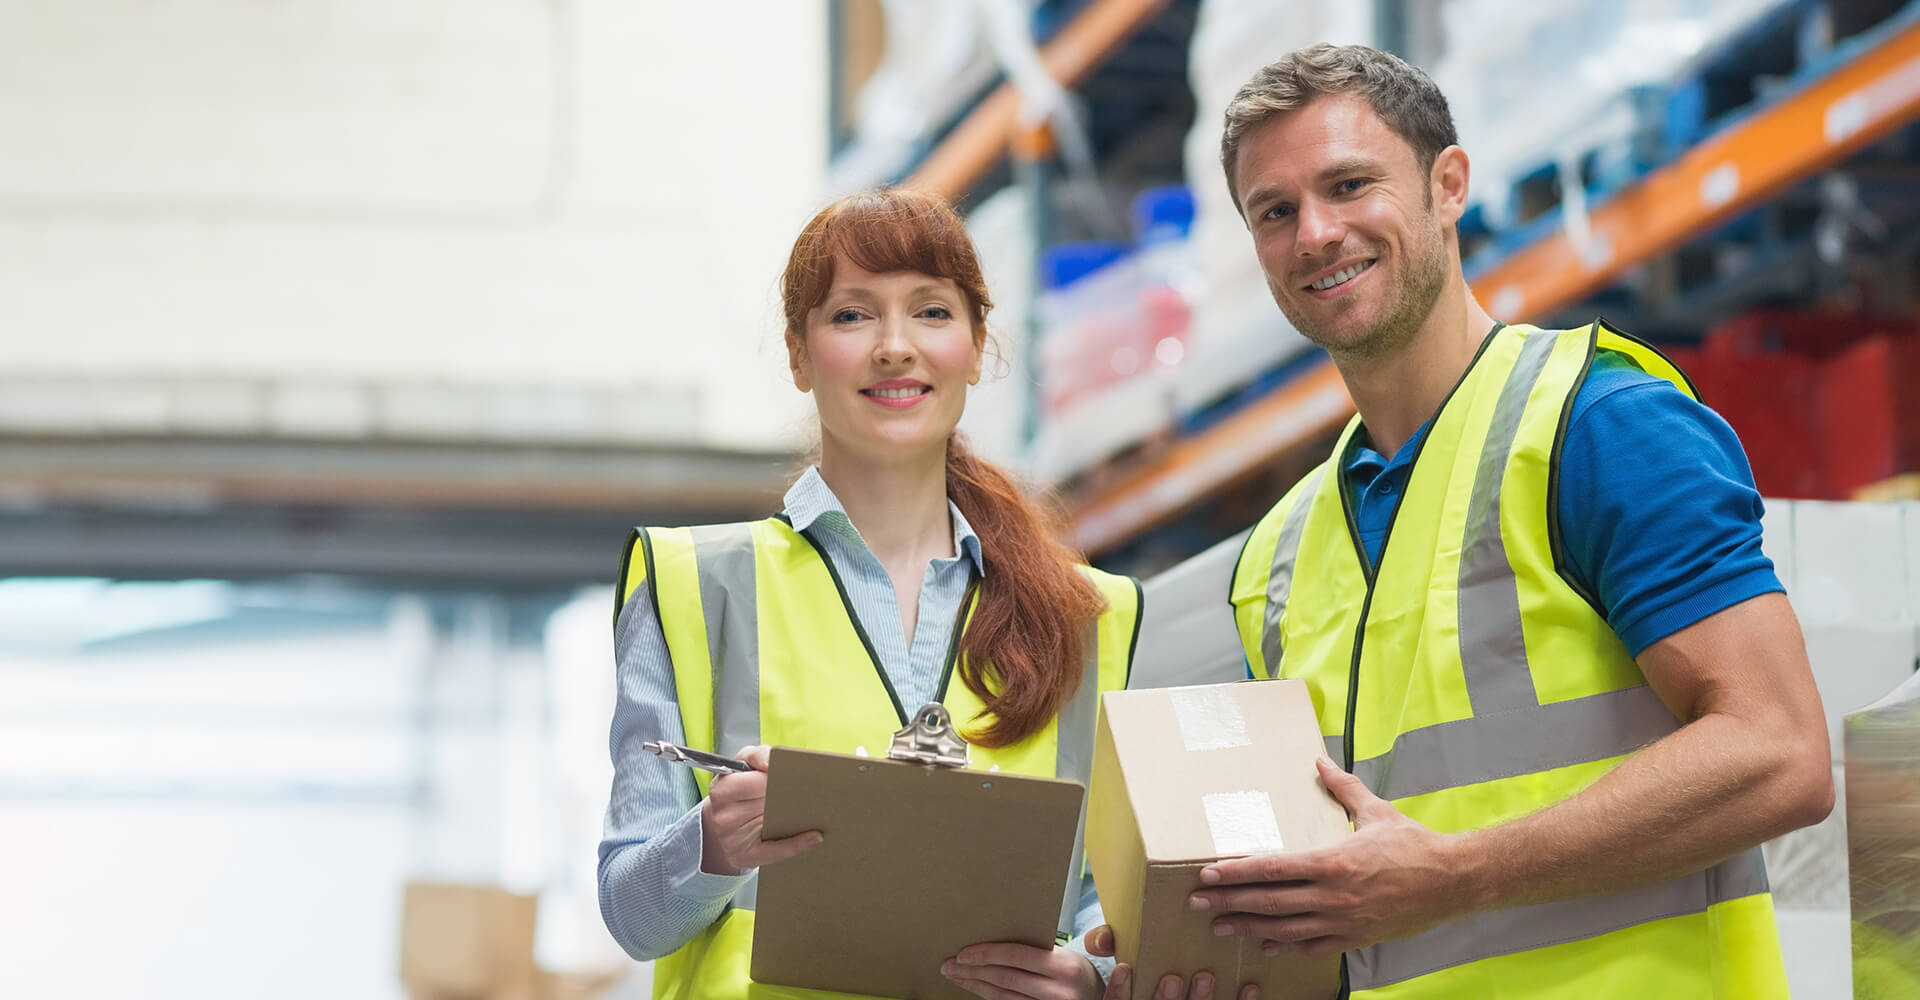 Supply chain management professionals working on logistics together in high visibility vests